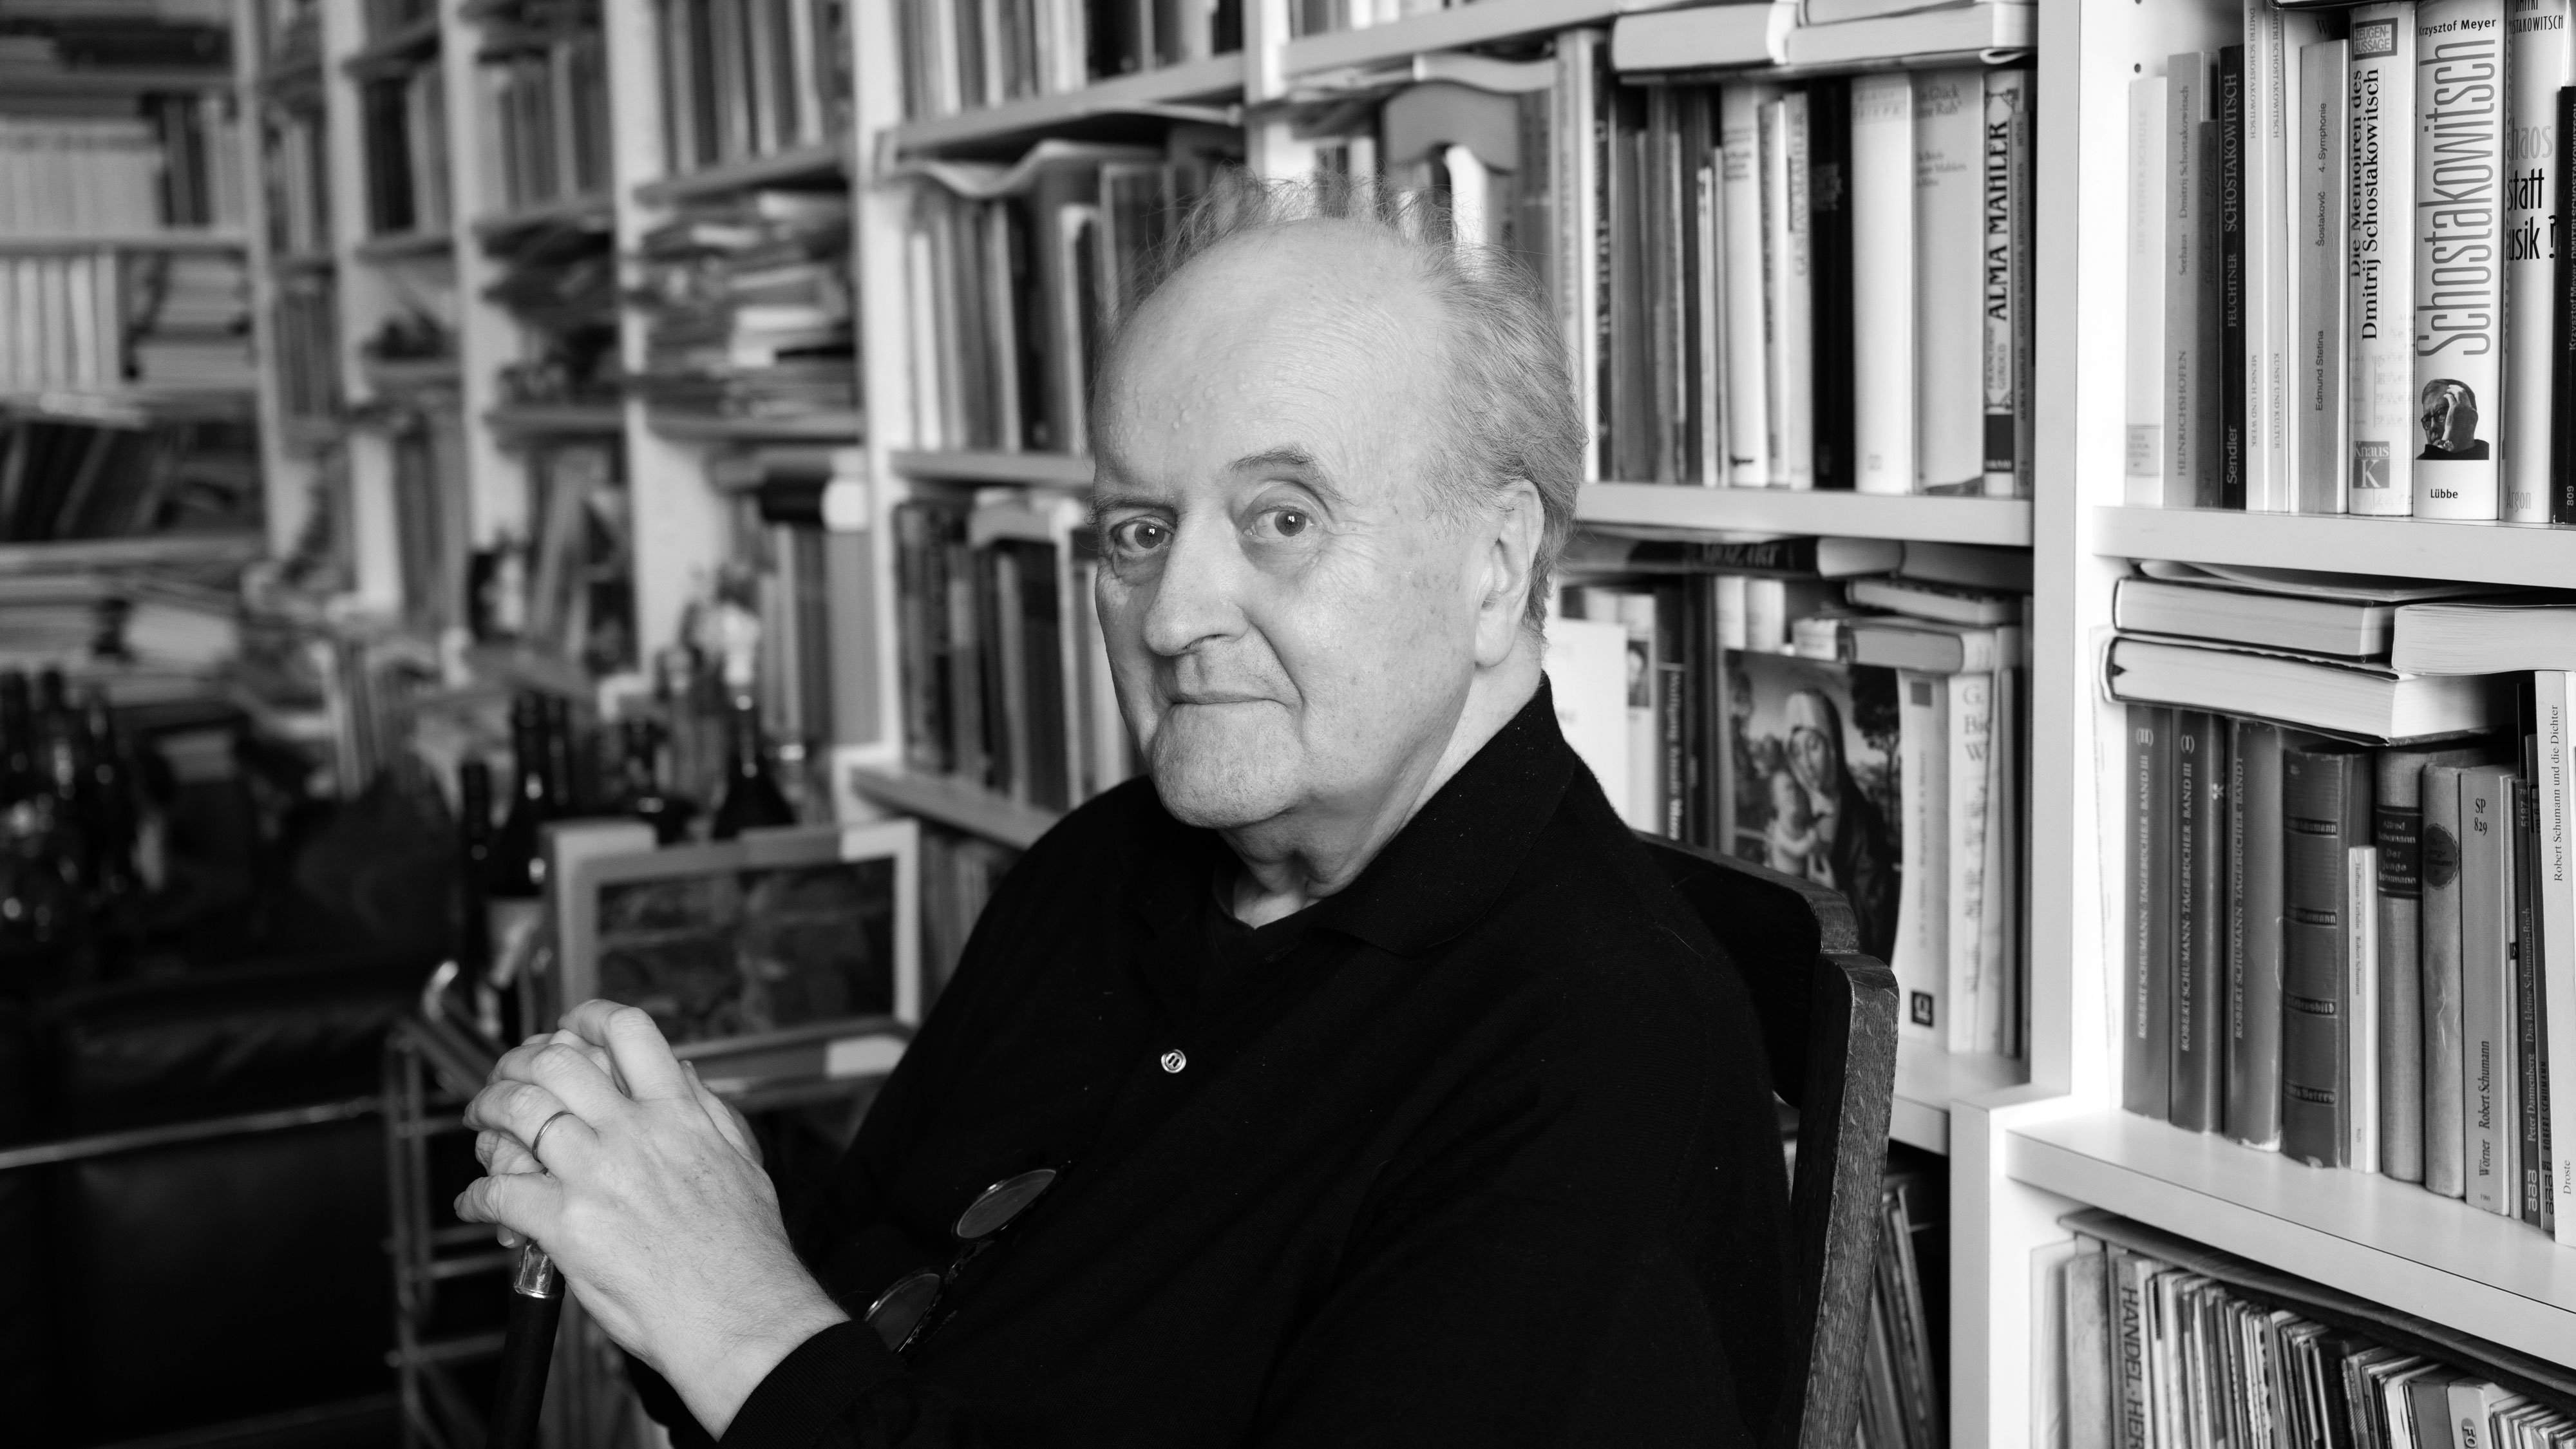 An older man is sitting in front of a full bookshelf. He has thinning hair and is wearing a dark jumper. He is holding a walking stick in his hand. The picture is in black and white.